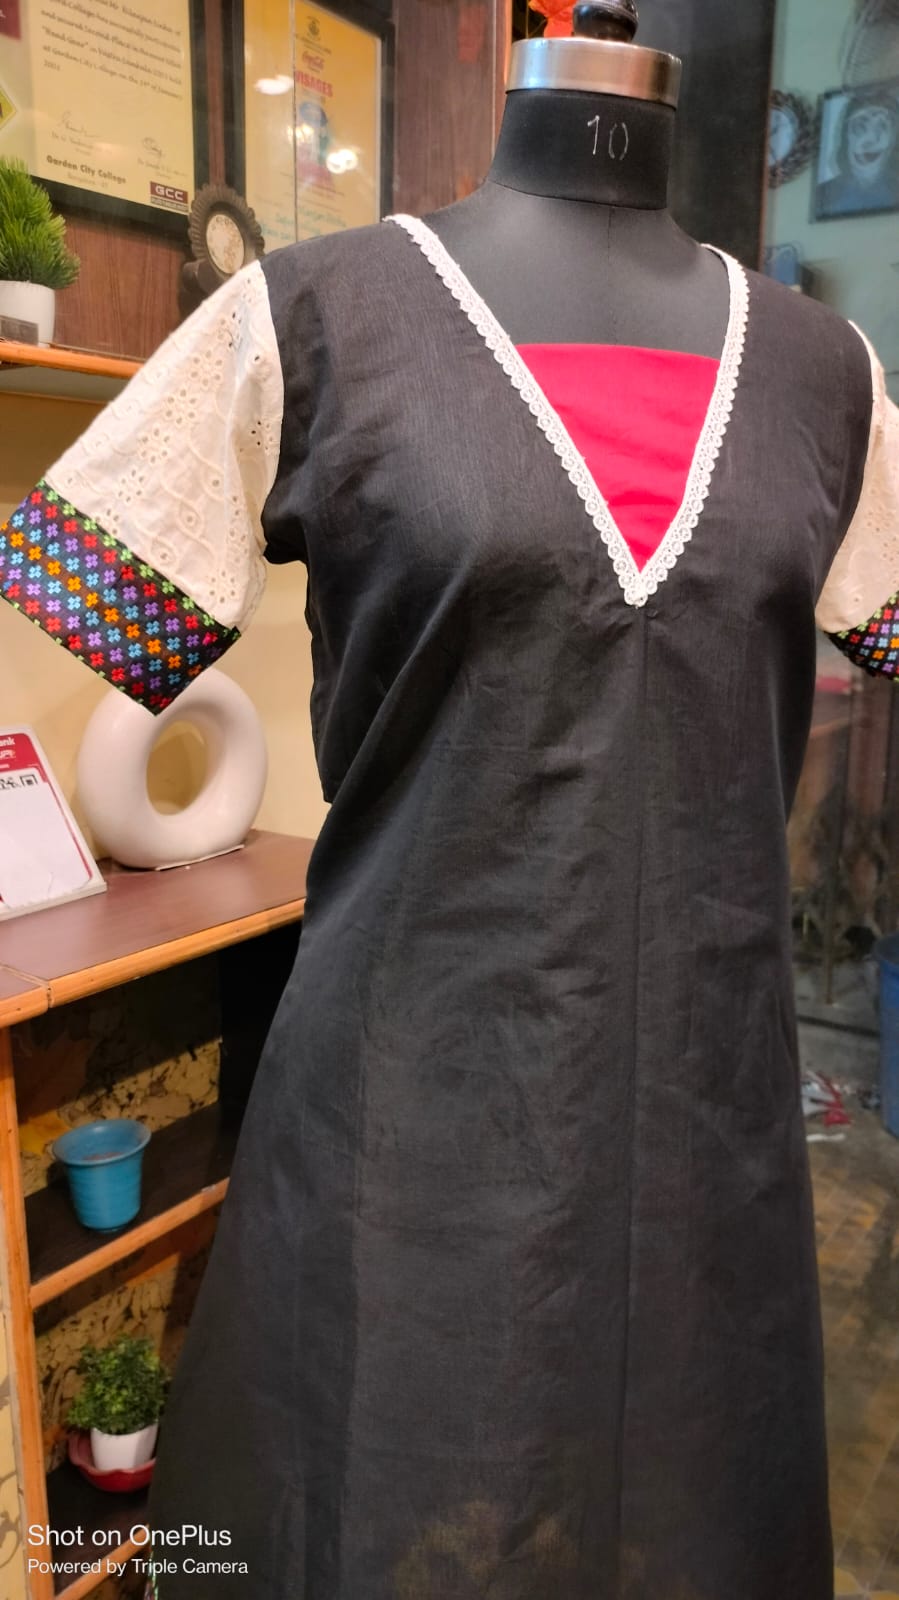 One piece Handloom khes with multi jacquard border design